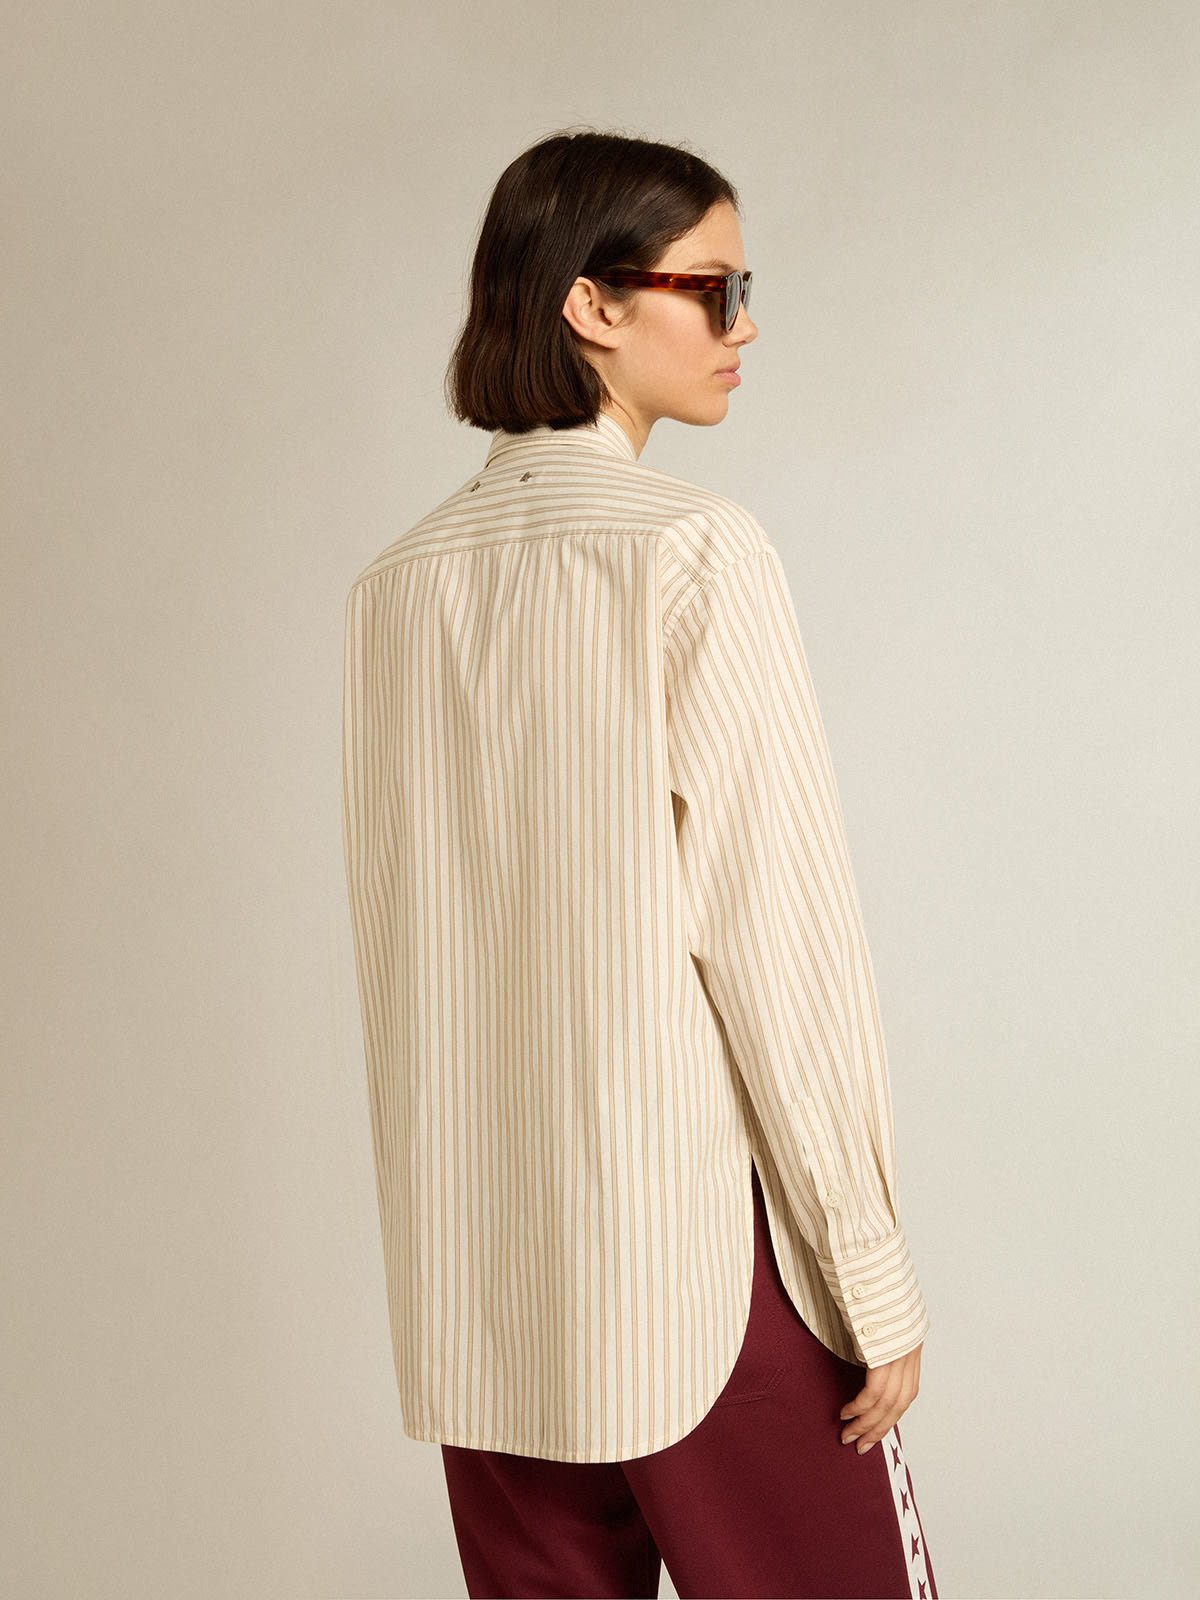 Golden Goose - Women’s white cotton shirt with beige stripes in 